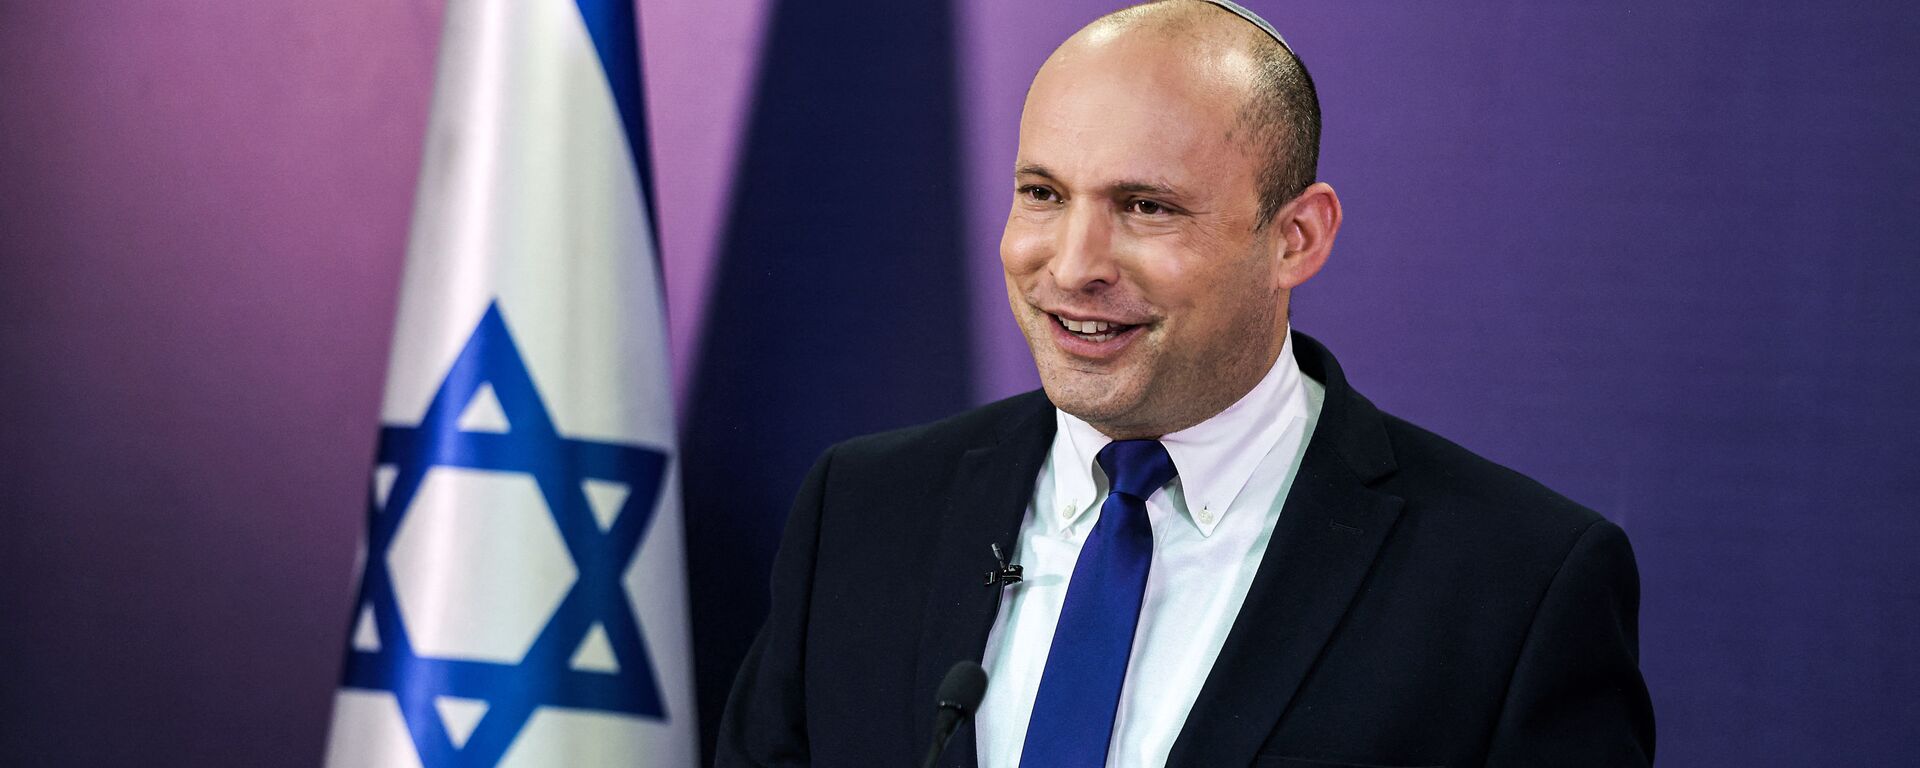 Naftali Bennett, Israeli parliament member from the Yamina party, gives a statement at the Knesset, Israel's parliament, in Jerusalem on June 6, 2021. - In power for 12 consecutive years, Israel's embattled Prime Minister Benjamin Netanyahu faces being toppled by a motley coalition of lawmakers united only by their shared hostility towards him. Under the agreement, the right-wing nationalist Bennett would be premier for two years, to be replaced by the centrist Yair Lapid of the Yesh Atid party in 2023. - Sputnik International, 1920